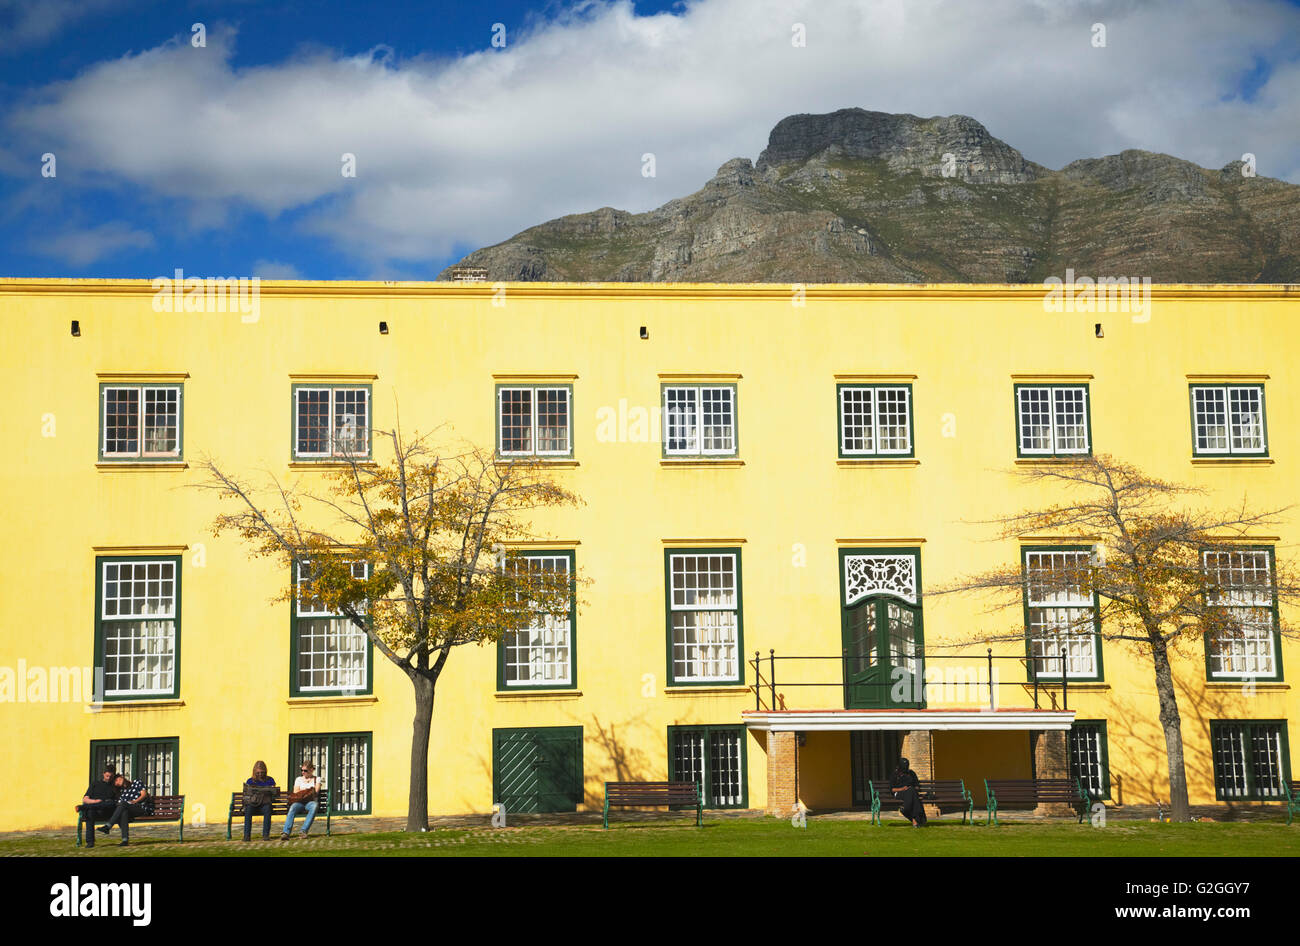 People sitting in courtyard inside Castle of Good Hope, City Bowl, Cape Town, Western Cape, South Africa Stock Photo